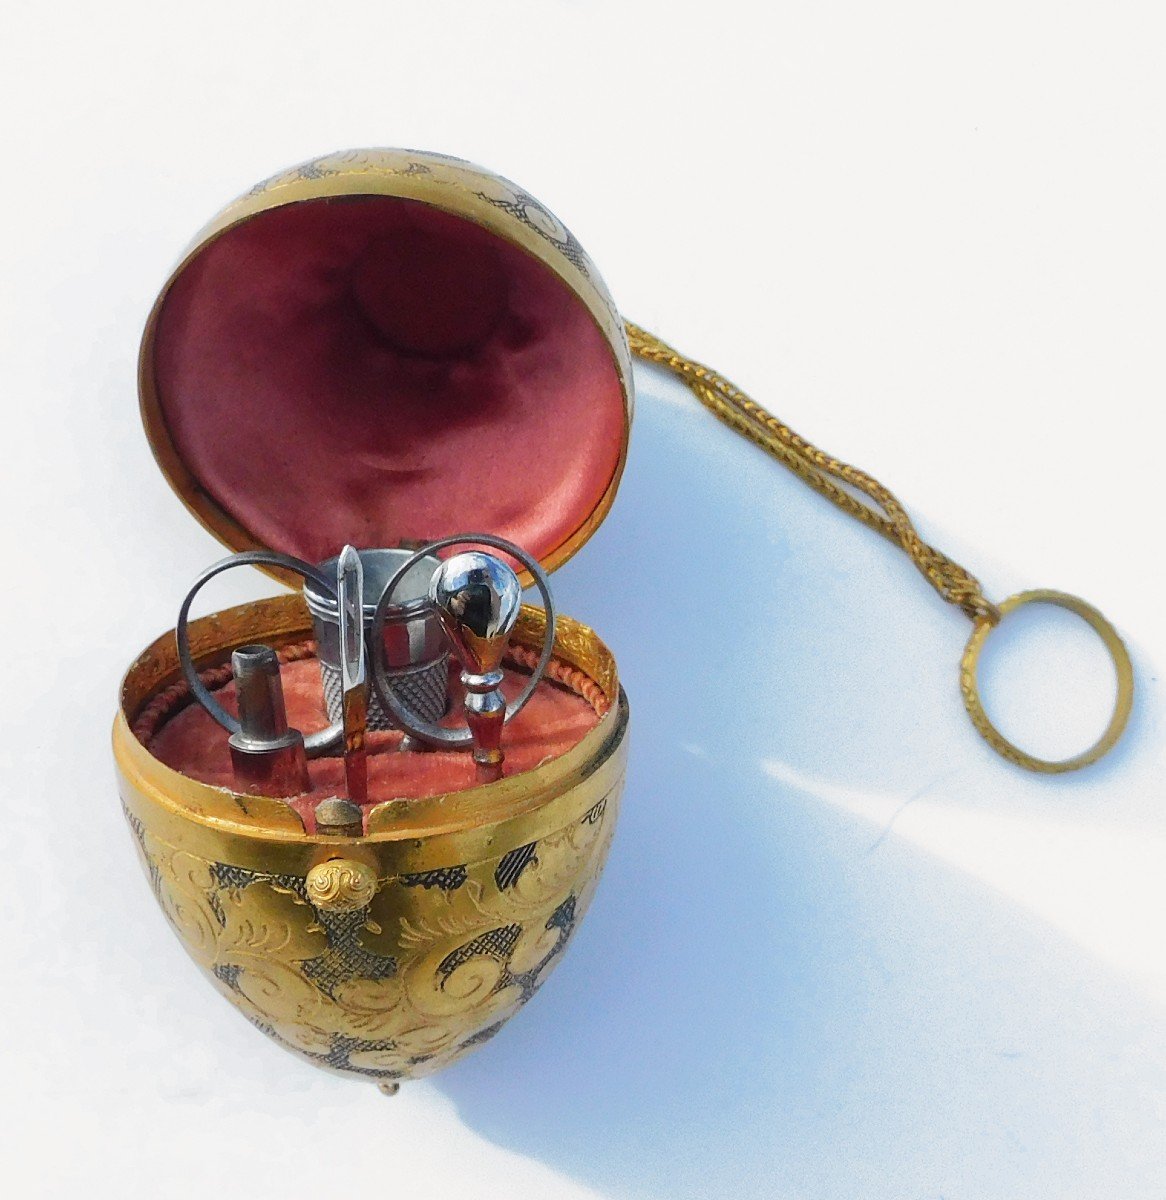 Miniature Steel Sewing Kit In A Golden Metal Egg-shaped Box-photo-3